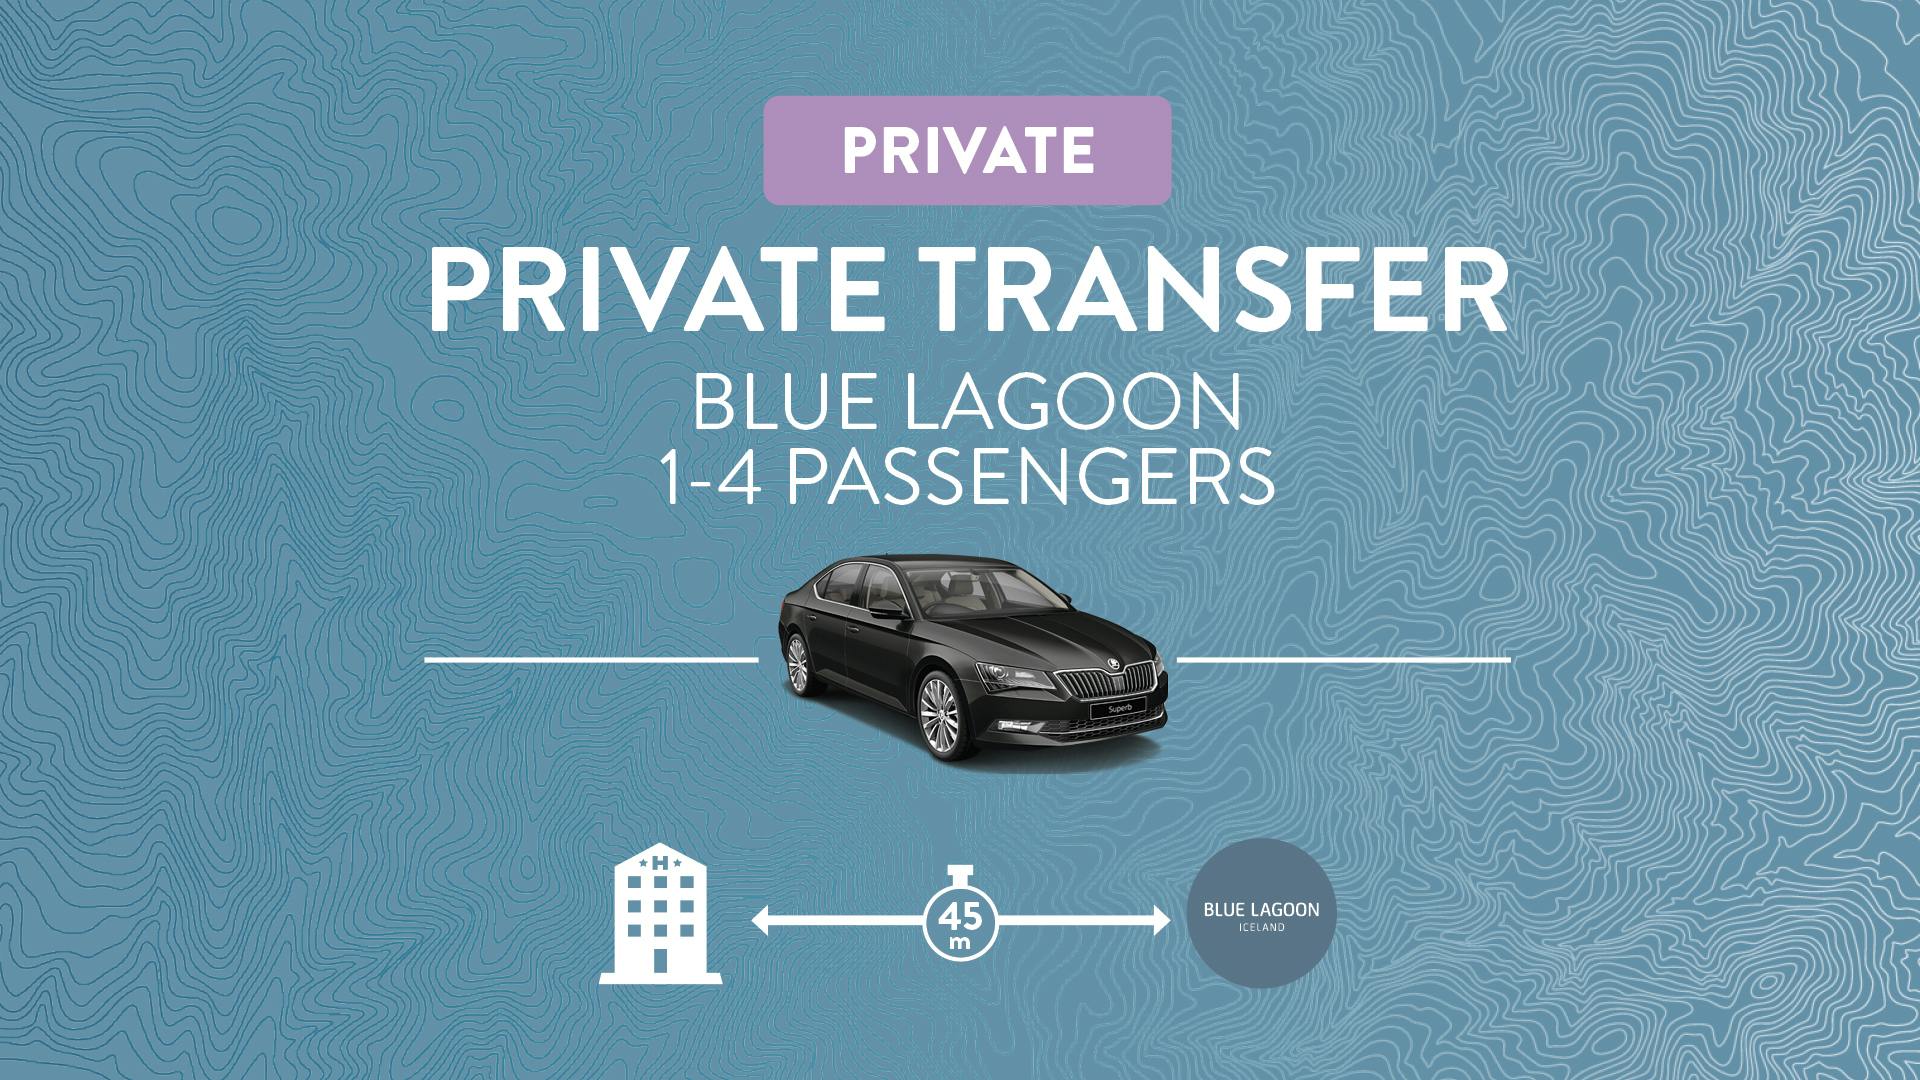 Blue Lagoon Private Transfer for 1-4 passengers